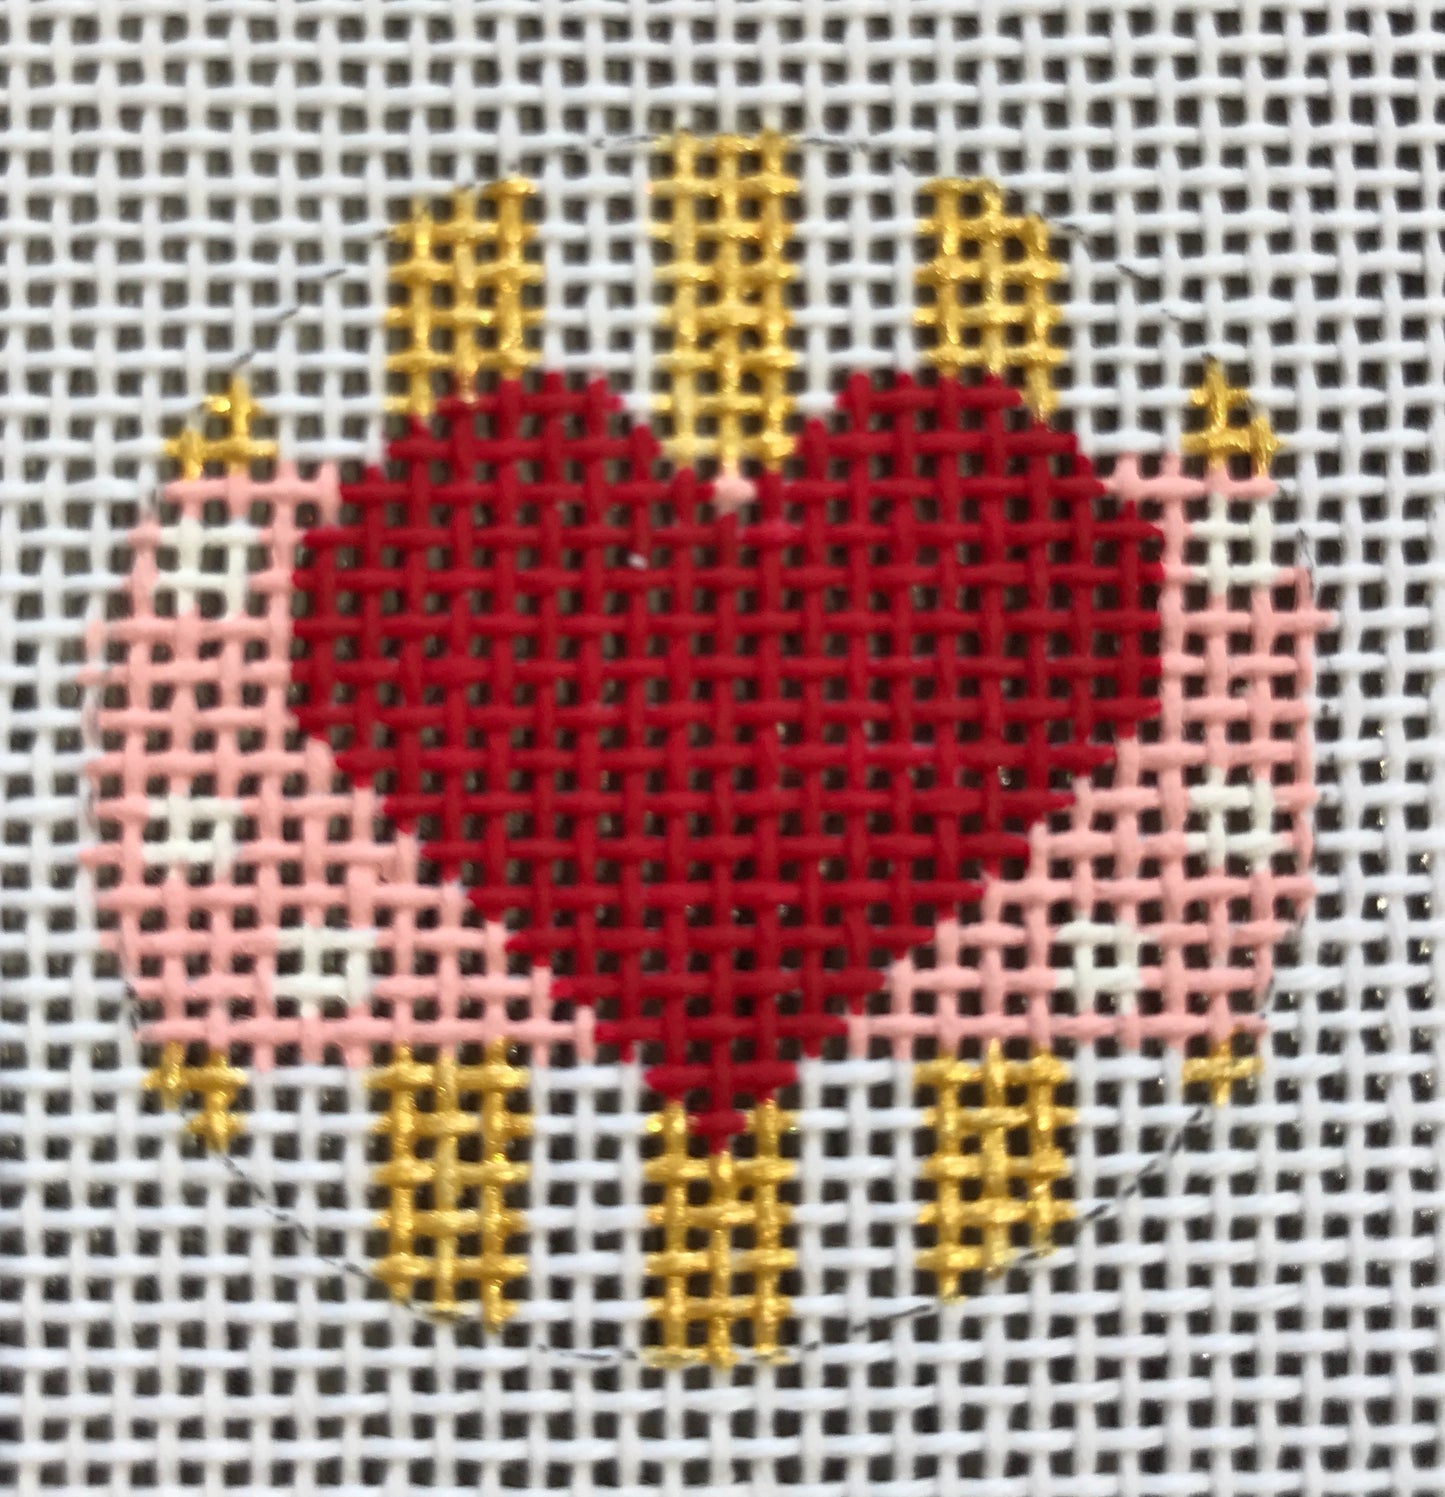 Fob Insert- Red Heart with pink and gold